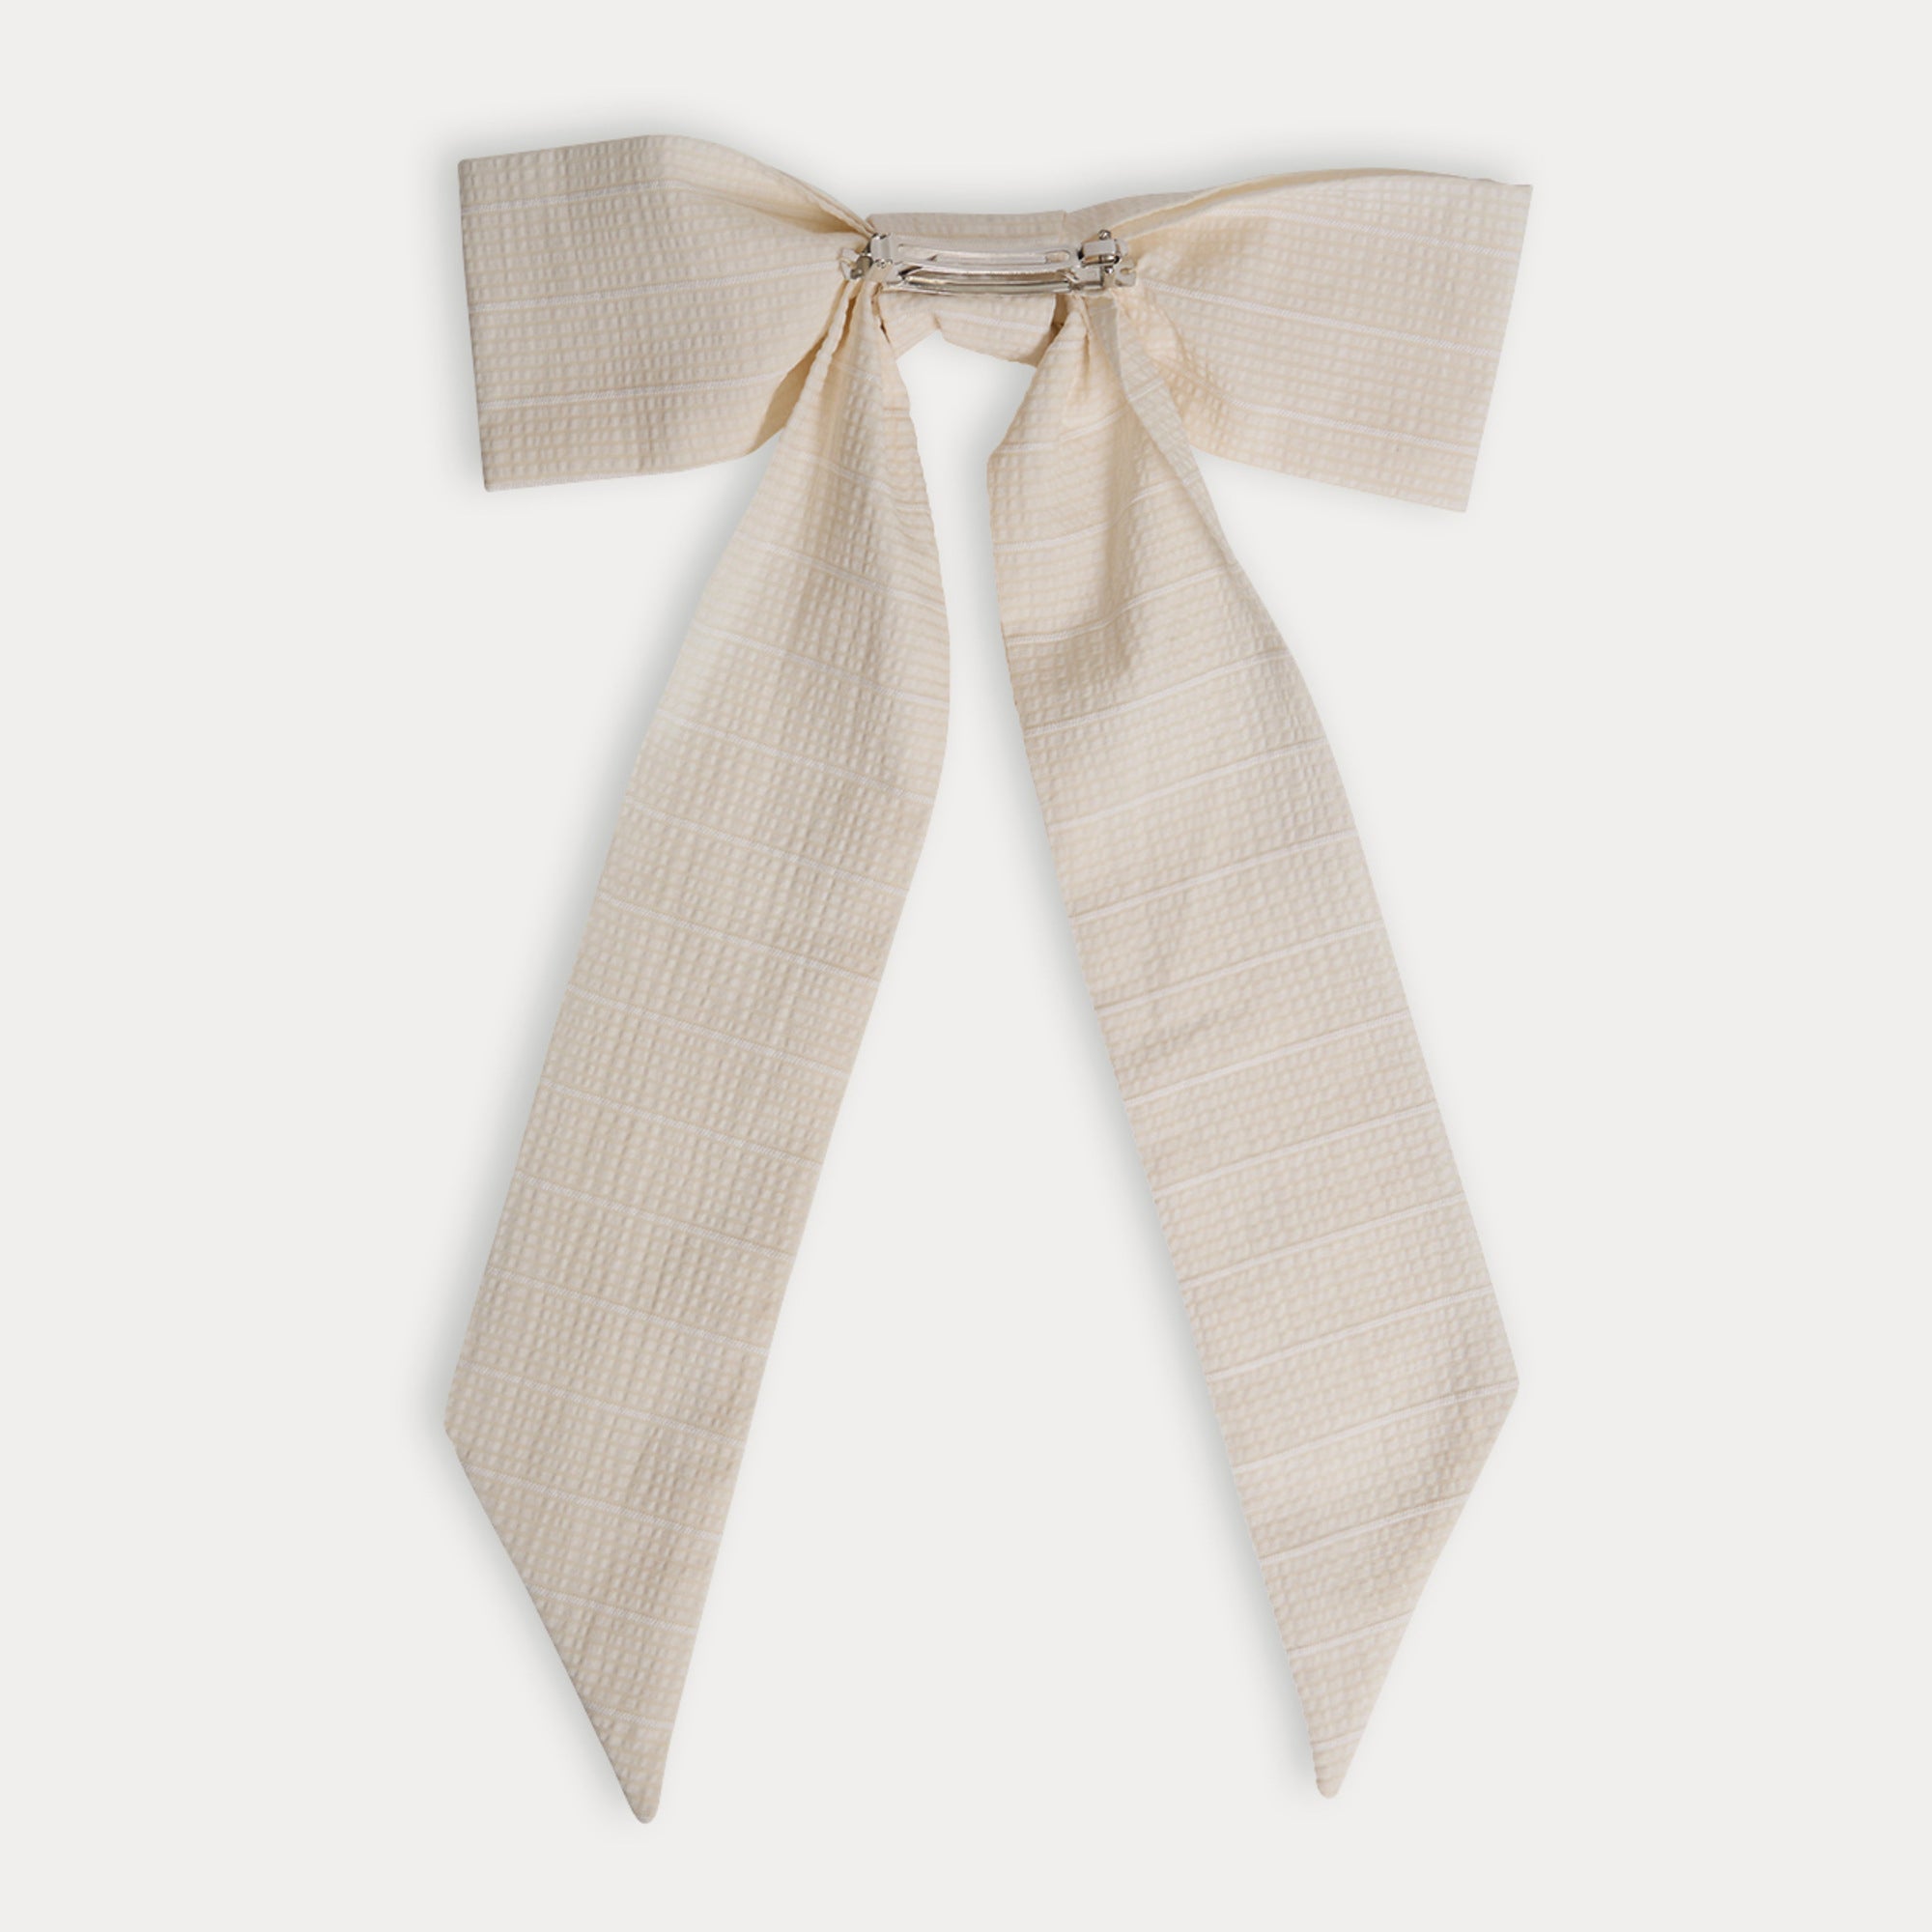 Girls Ivory Bow Hair Clips